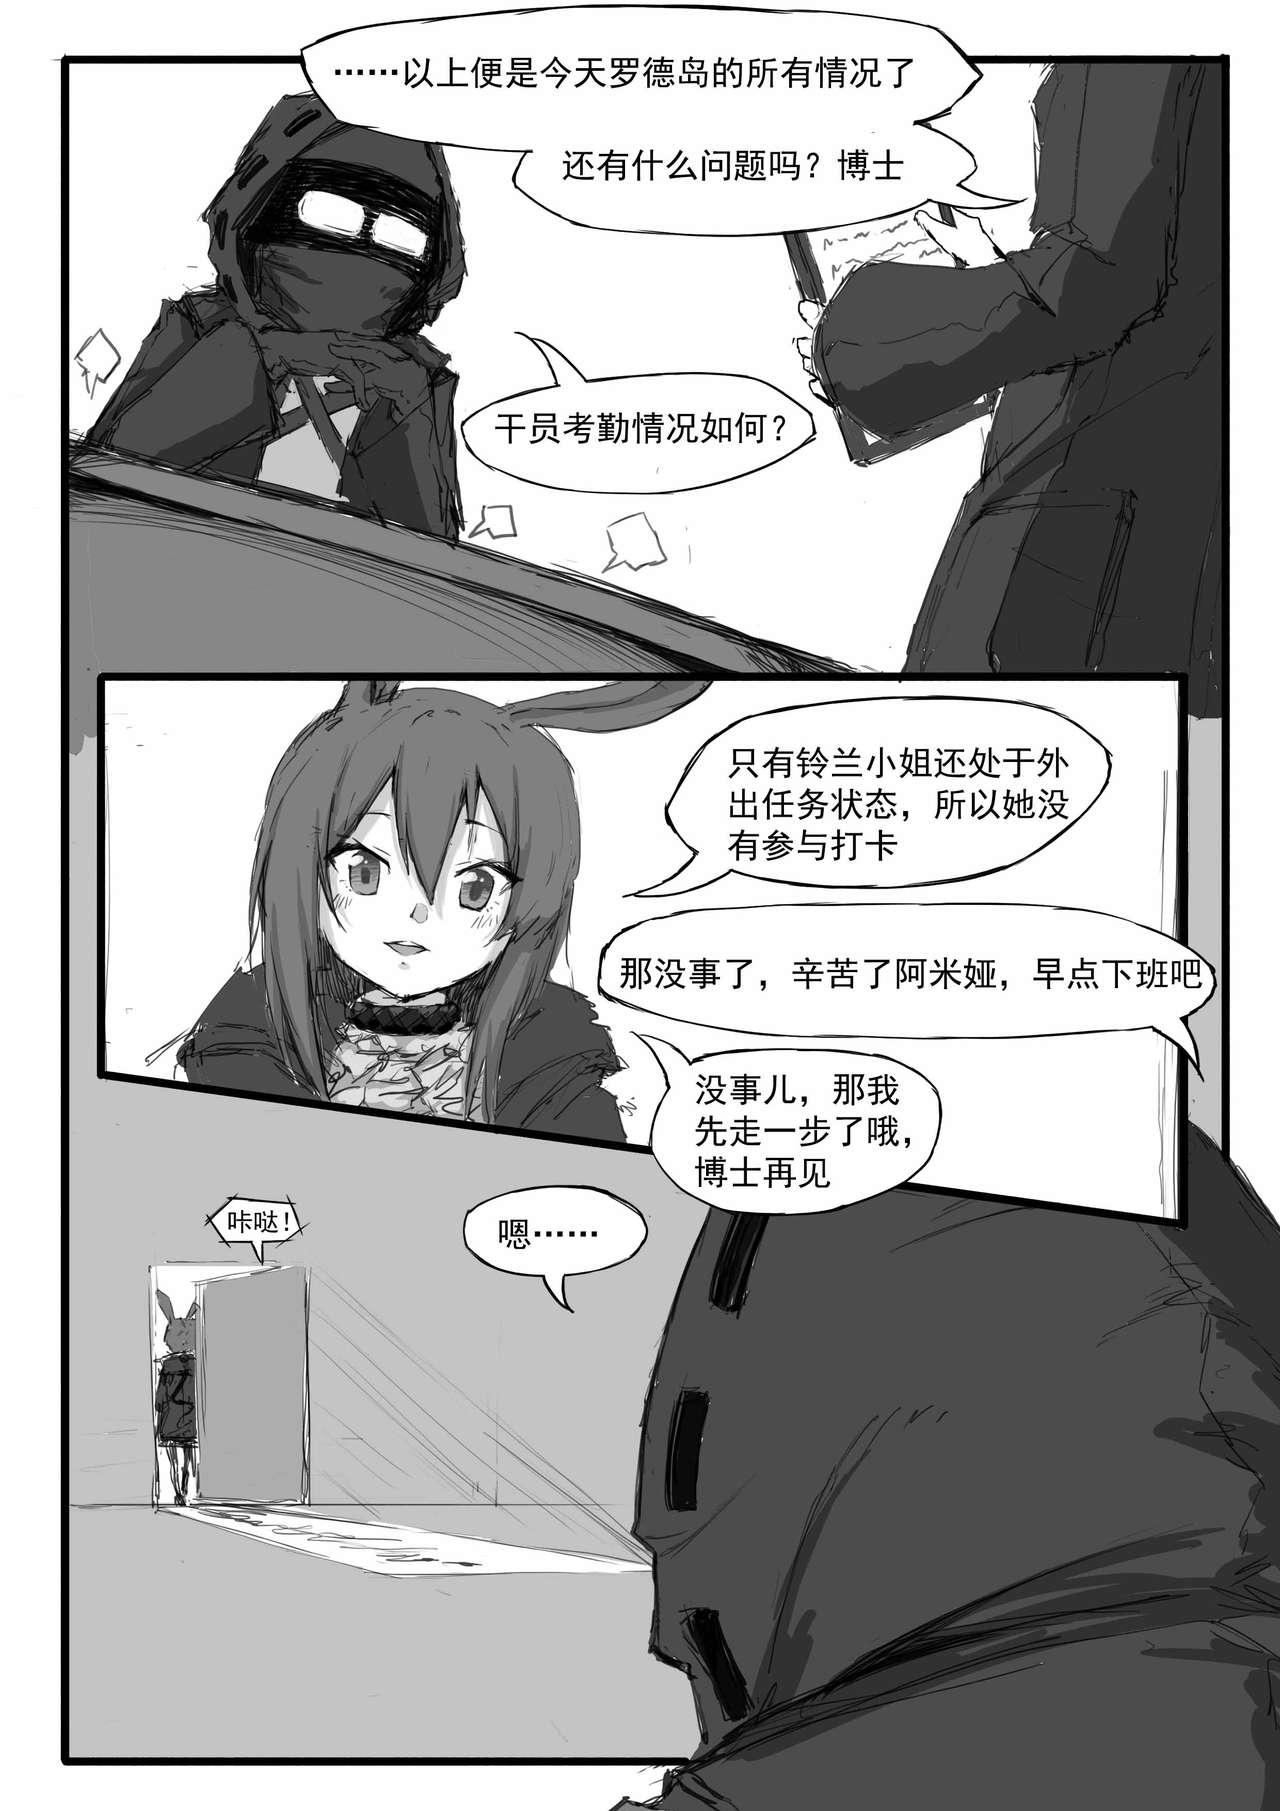 Teen 铃兰的单人任务 - Arknights Fetiche - Page 2